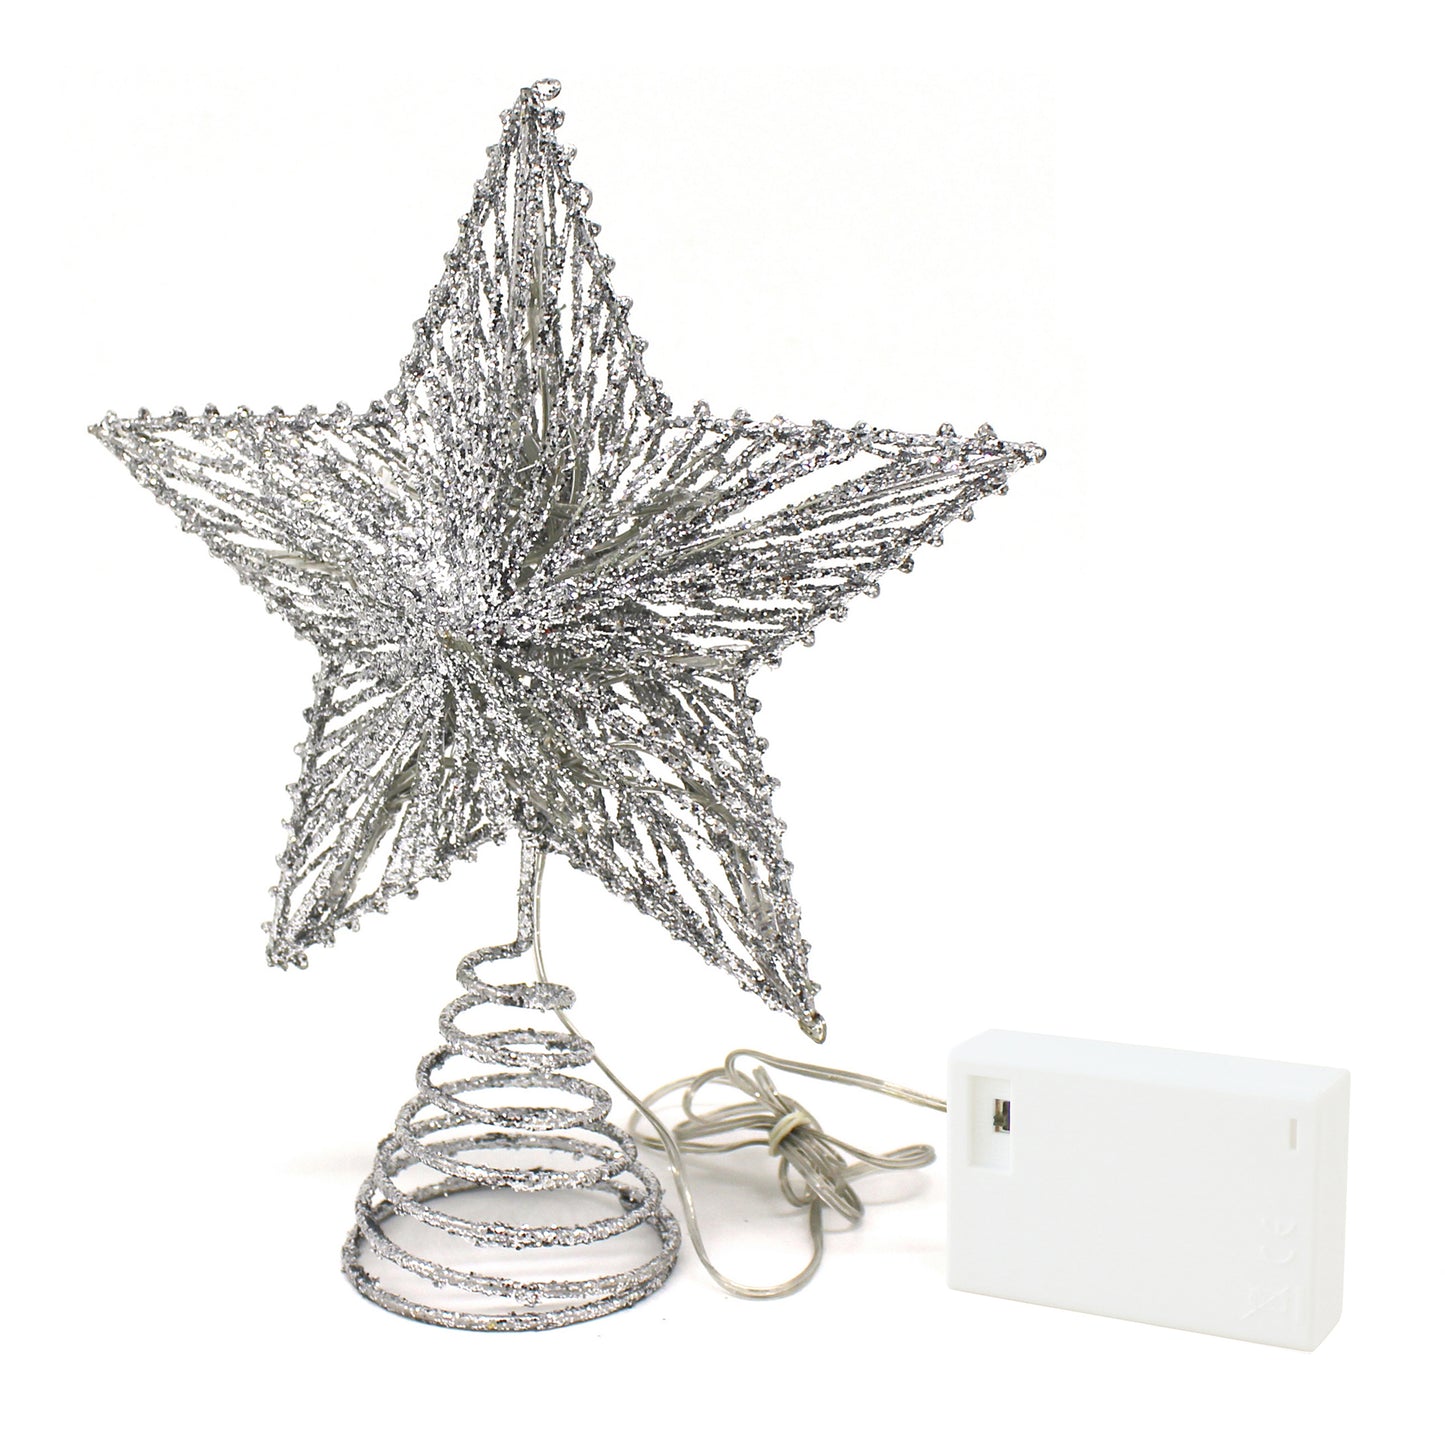 CVHOMEDECO. Silver Glittered 3D Tree Top Star with Warm White LED Lights and timer for Christmas Ornaments and Holiday Seasonal Décor, 8 x 10 Inch